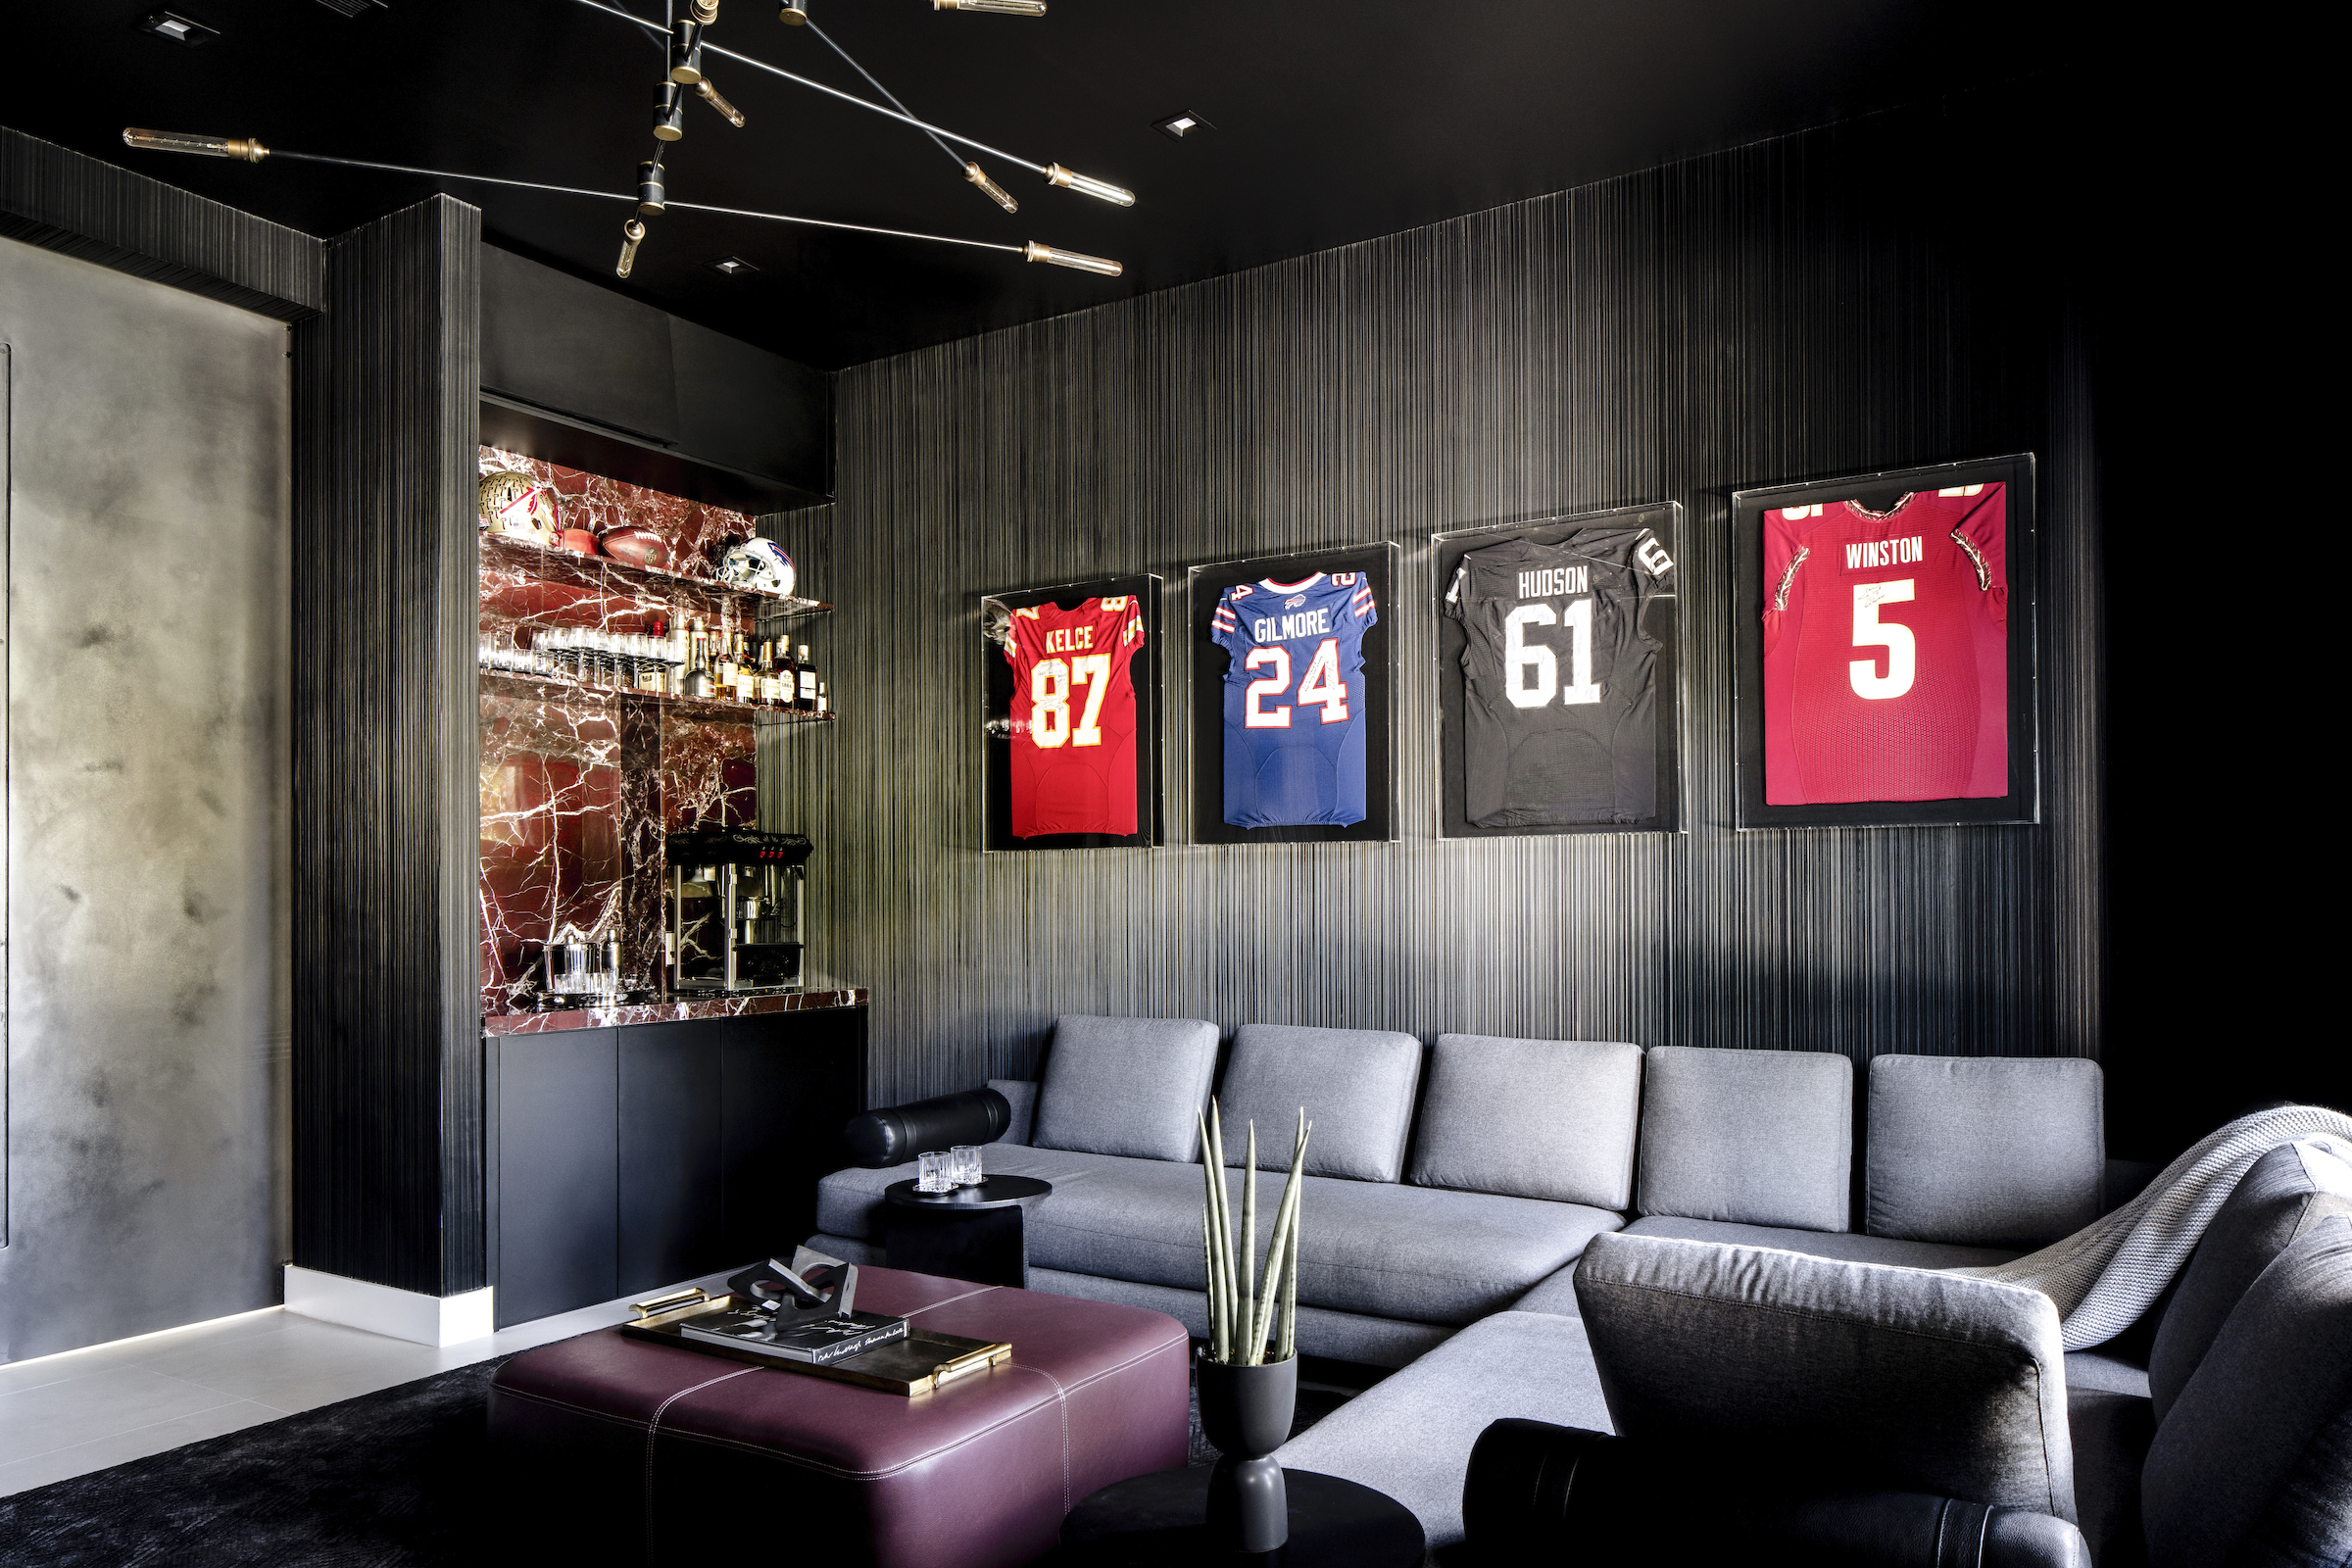 Sporting memorabilia in a living room interior designed by Eilyn Jimenez at the home of Erik Rodriguez “EJ” Manuel Jr in Effect Magazine